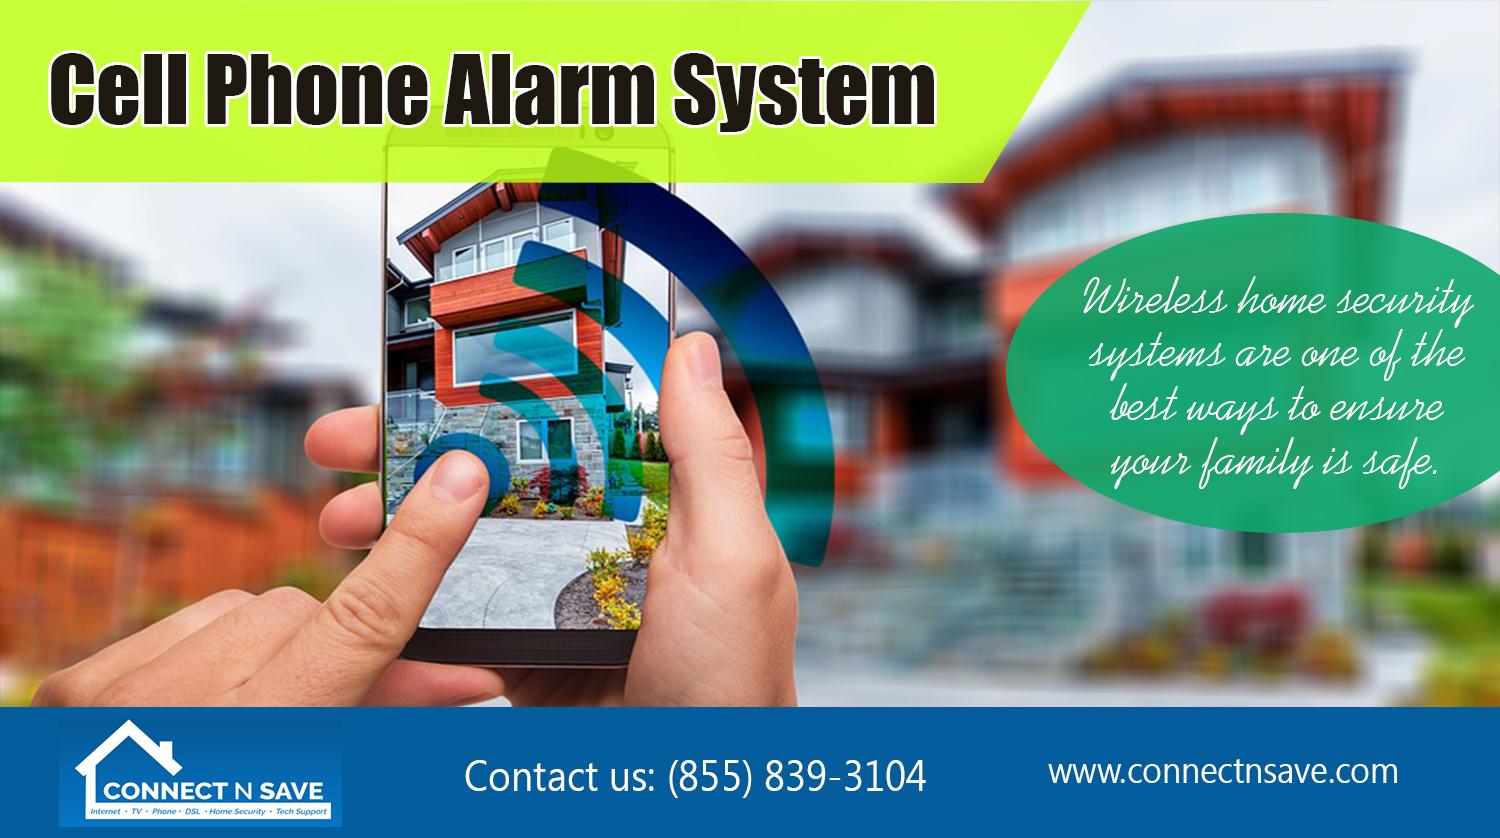 Cell Phone Alarm System | http://connectnsave.com/